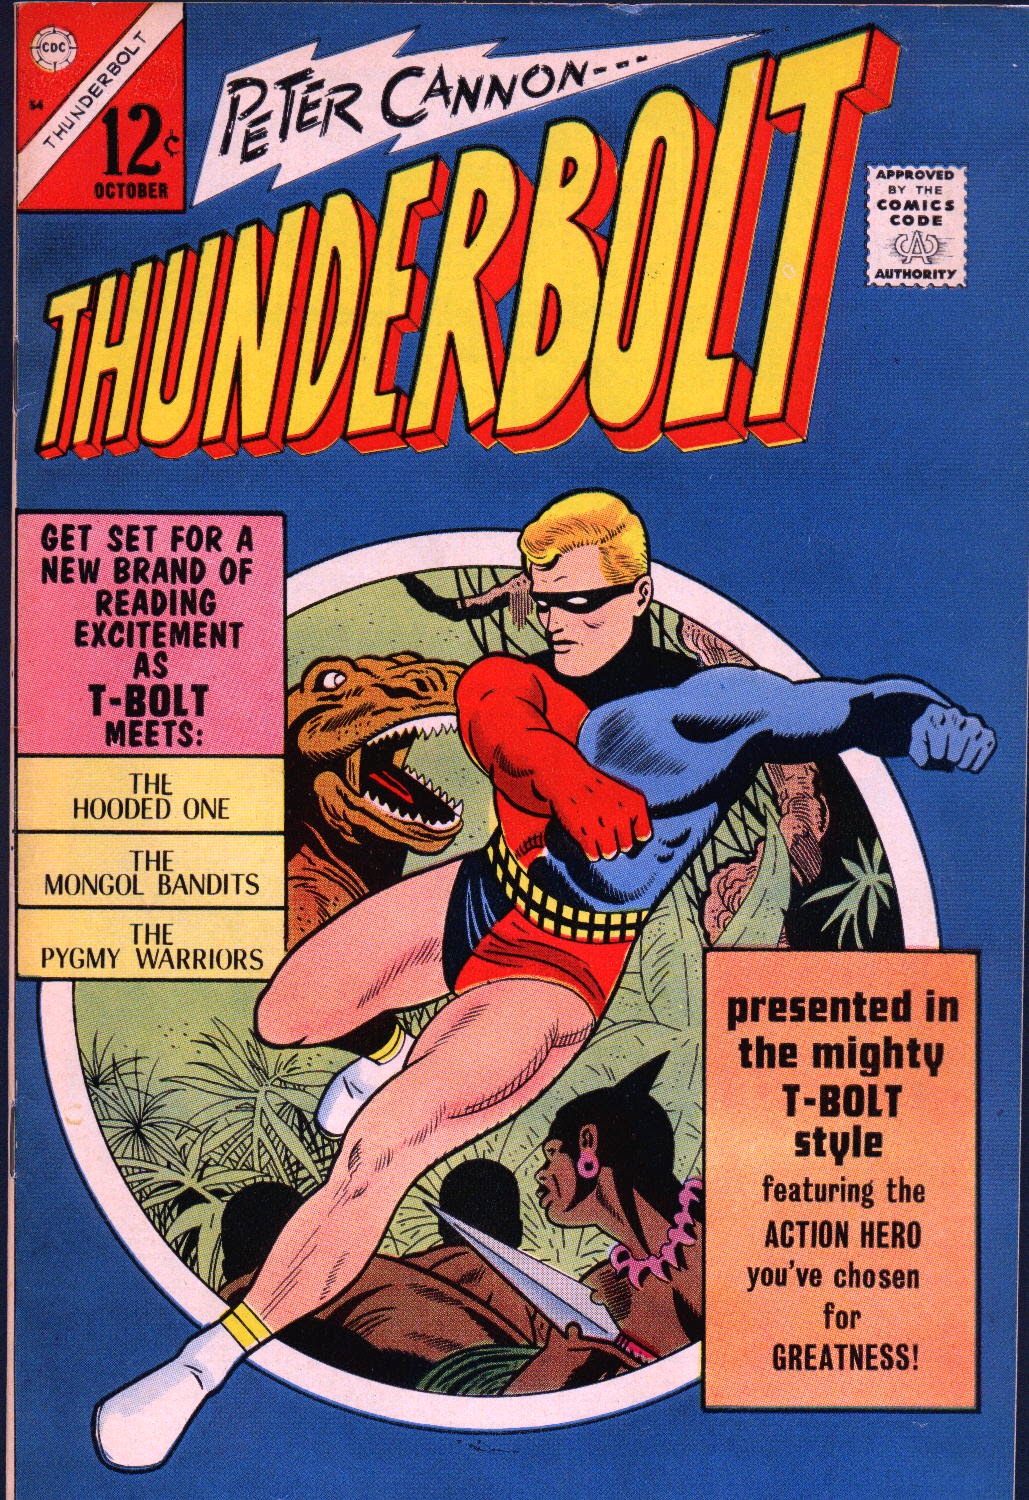 Peter Cannon: Thunderbolt #1